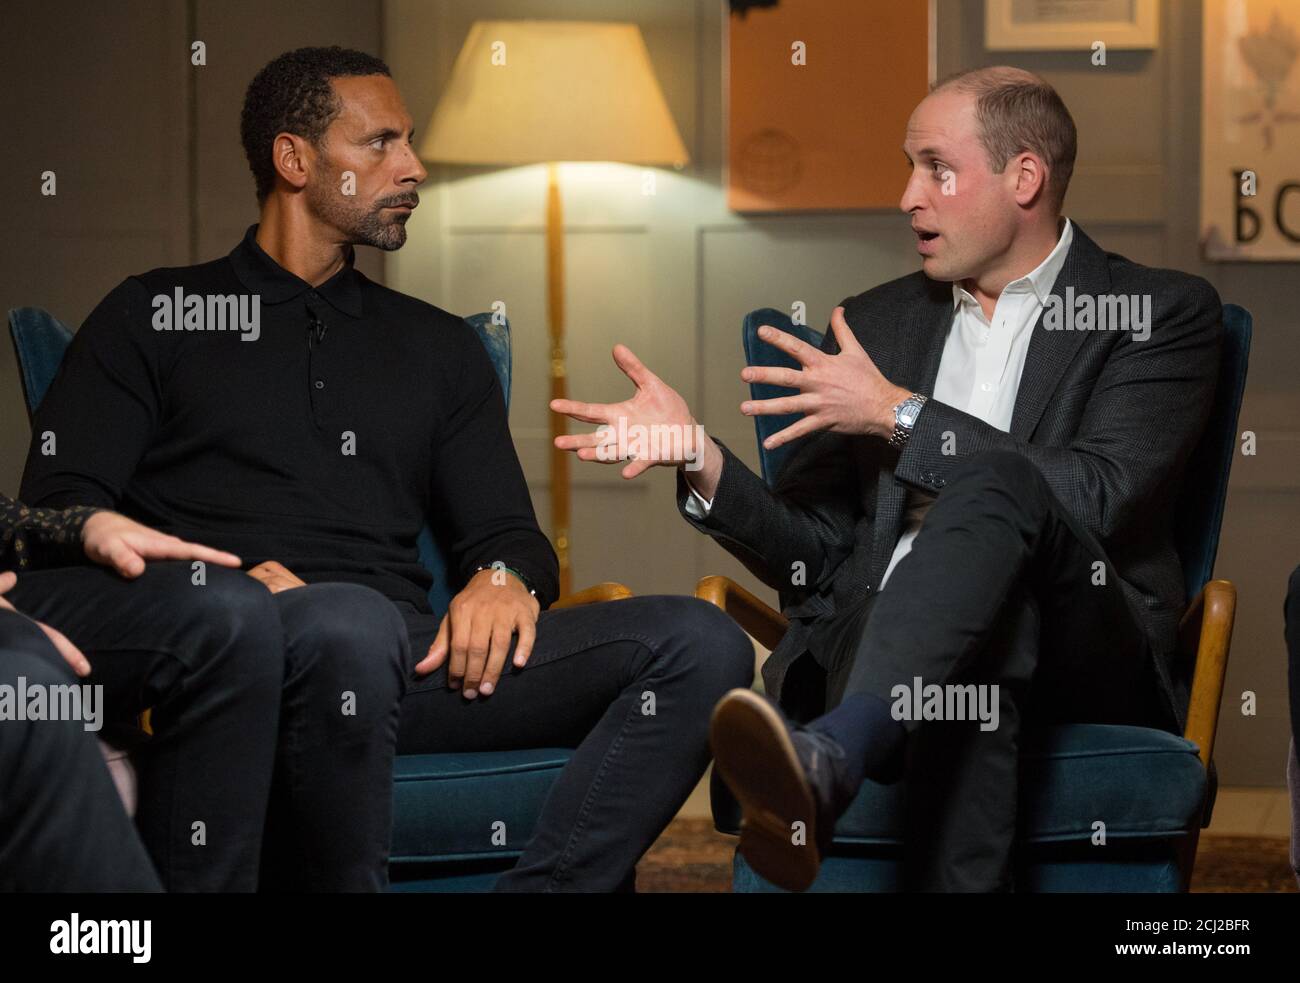 The Duke of Cambridge (R) with Rio Ferdinand during a visit to meet staff, volunteers, and supporters of 'Campaign Against Living Miserably' (CALM), a charity dedicated to preventing male suicide, to lend his support to their 'Best Man Project' at High Road House, London, Britain January 10, 2018. REUTERS/Dominic Lipinski/Pool Stock Photo